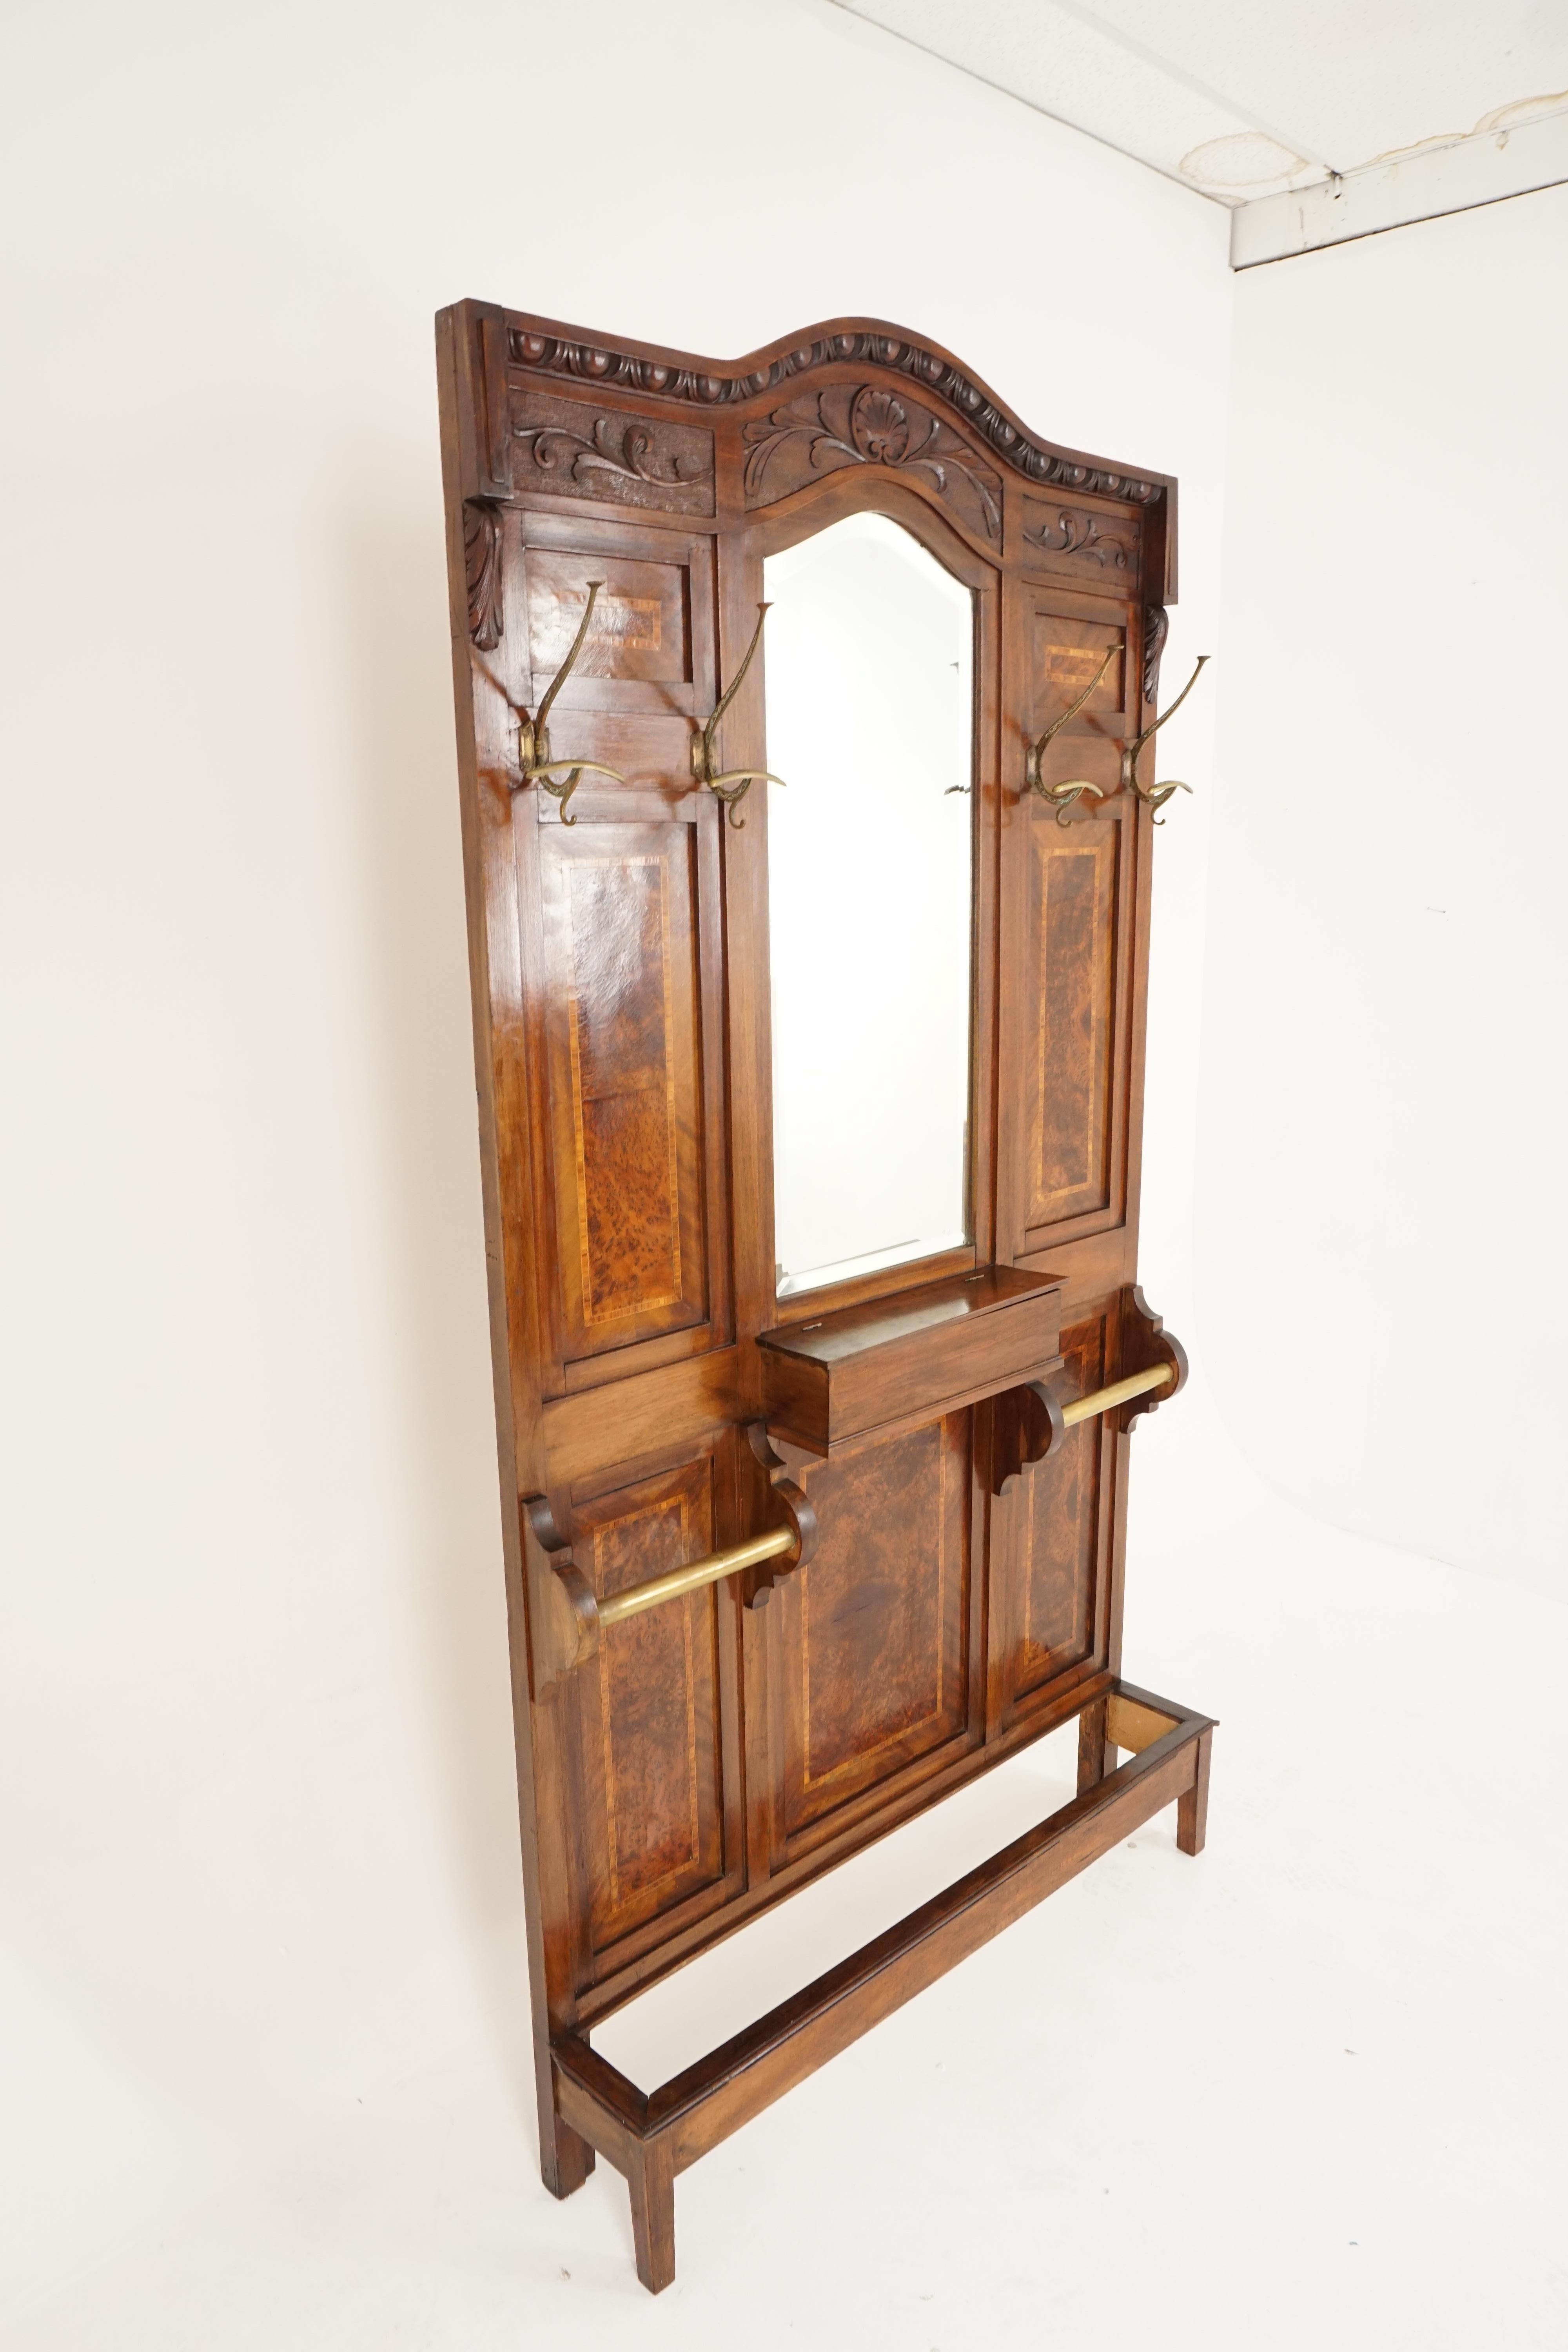 Antique french inlaid hall Stand, Walnut hall tree, coat and hat rack, France 1900, B2520

France 1900
Solid Walnut + veneers
Original finish
Carved shaped top
Three carved panels below
Original shaped beveled mirror
Inlaid panels on sides and in